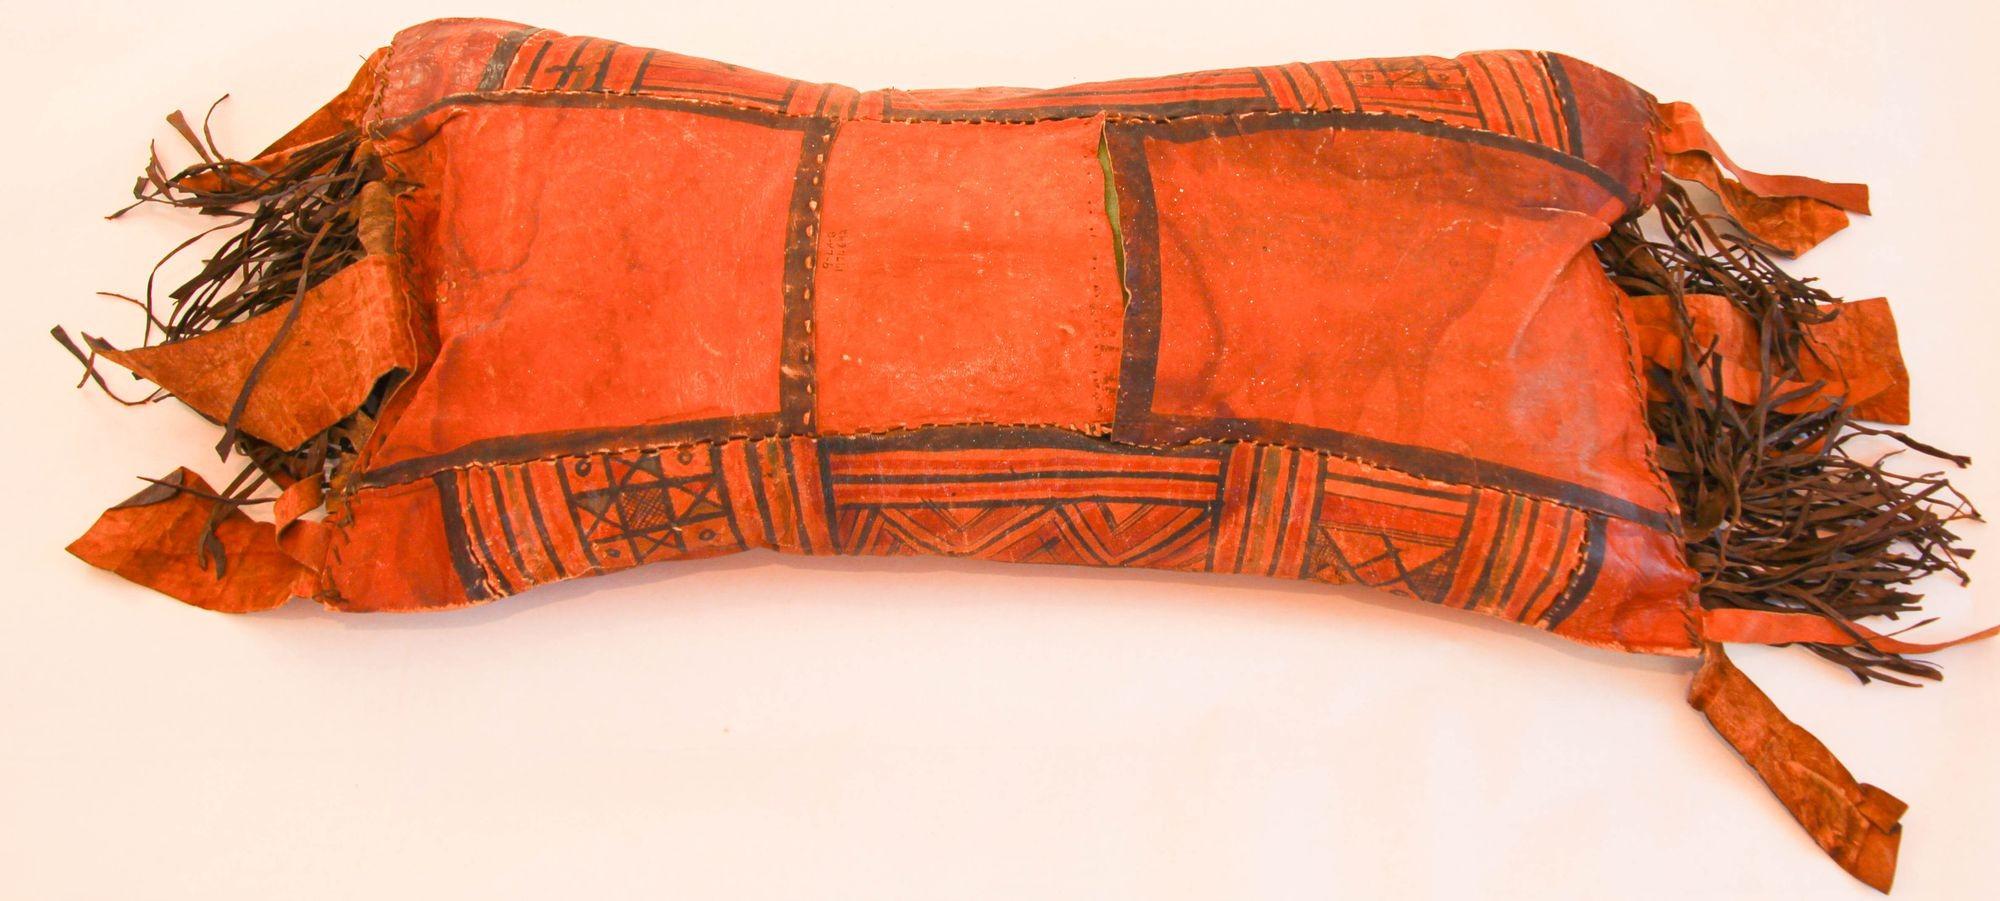 Large African Tuareg hand tooled leather pillow.
Great colors, hand painted with tribal geometric design with long leather fringes on each side.
Handcrafted in Africa with pieces of leather hand-sewn together and hand painted, the back has a